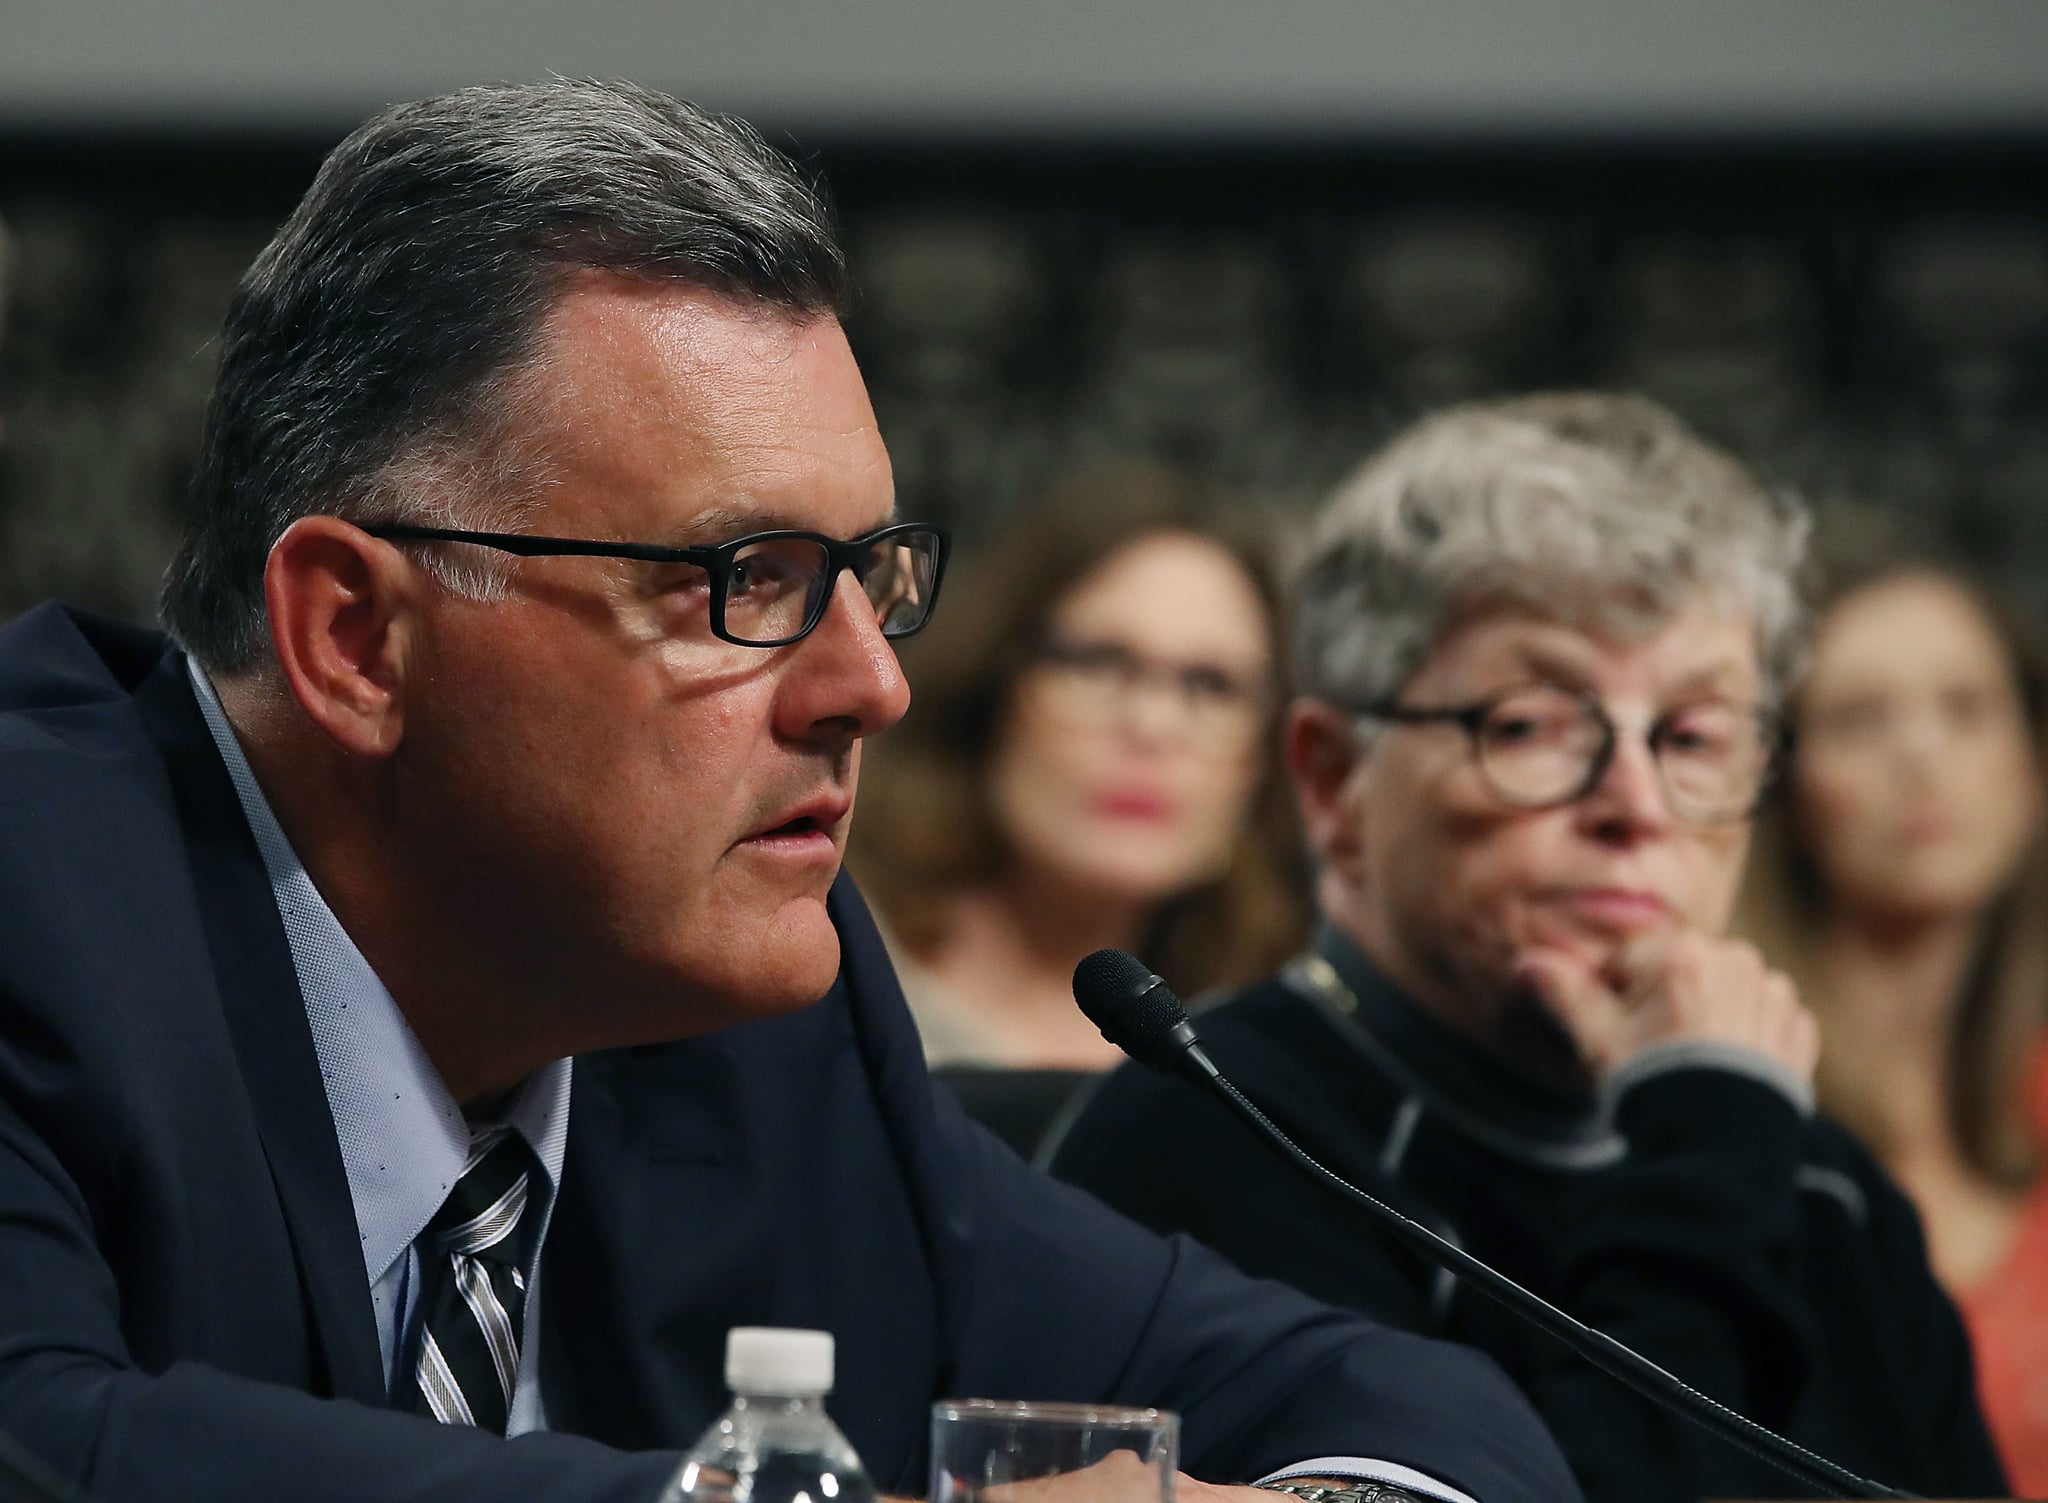 WASHINGTON, DC - JUNE 05: Steve Penny, former president of USA Gymnastics, pleads the Fifth, while seated next to Lou Anna Simon,(R), former president of Michigan State University, during a Senate Commerce, Science and Transportation Committee hearing, on June 5, 2018 in Washington, DC. The hearing focussed on preventing abuse in Olympic and amateur athletics and ensuring a safe and secure environment for athletes.  (Photo by Mark Wilson/Getty Images)